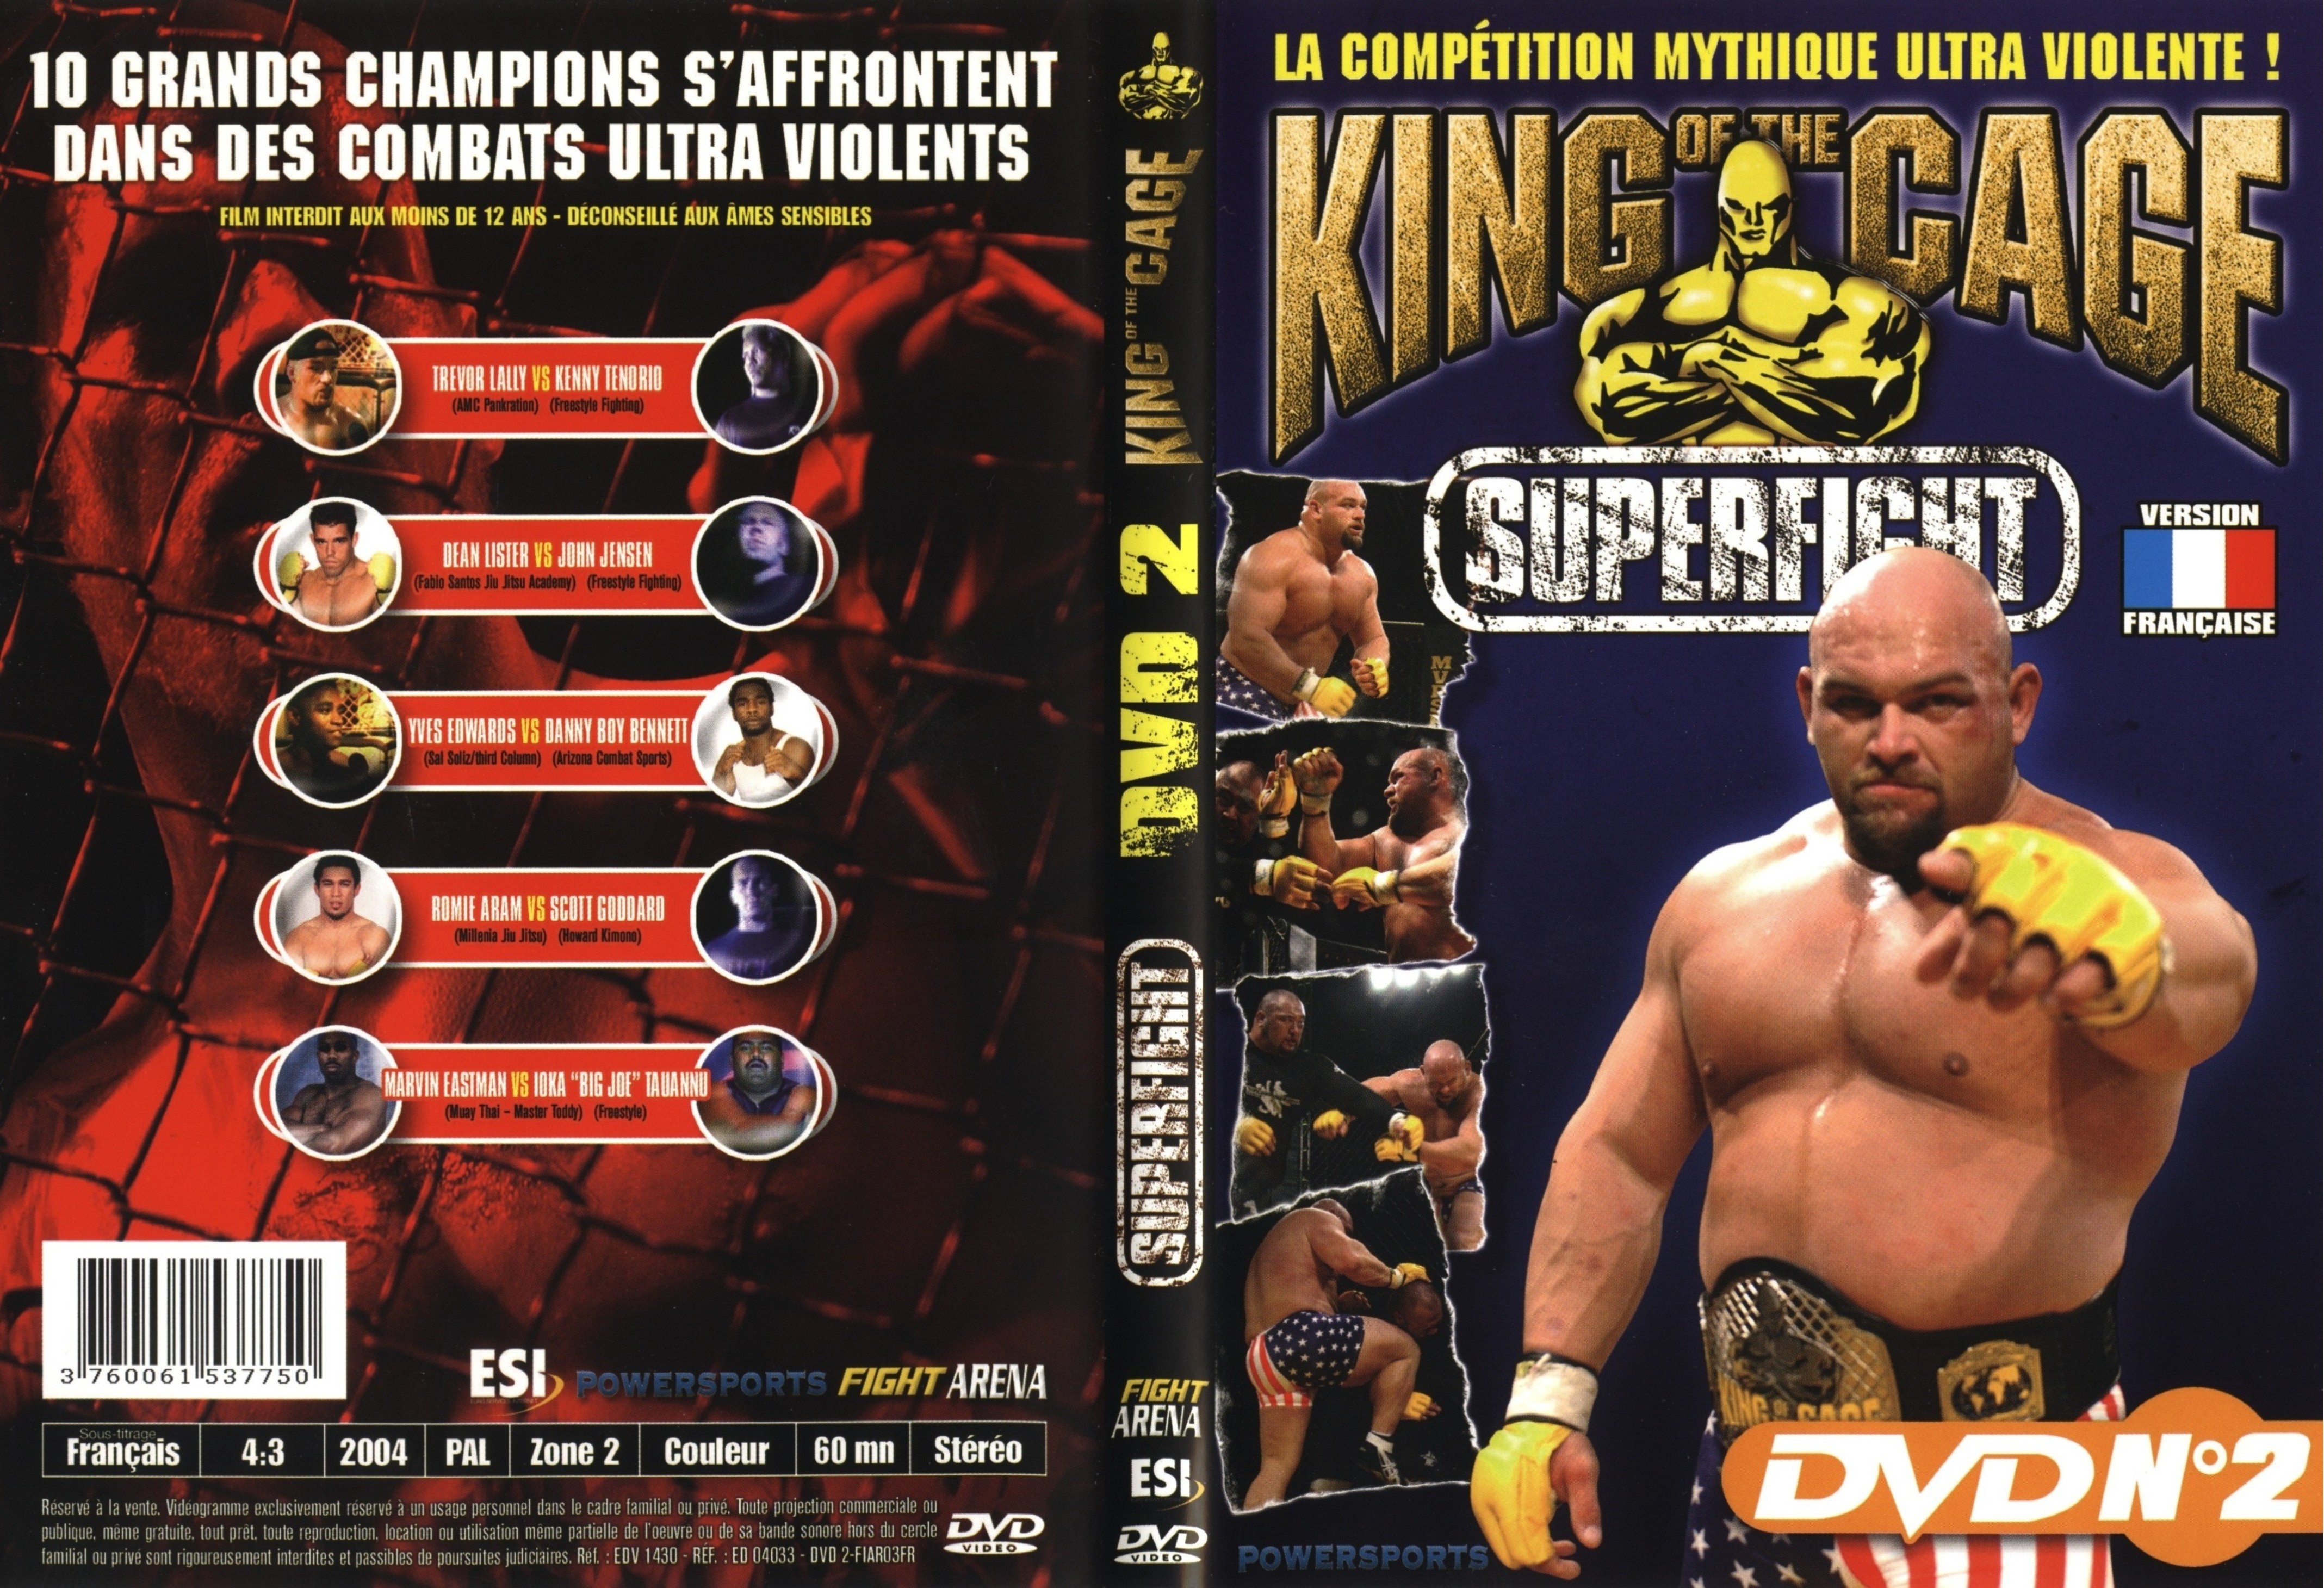 Jaquette DVD King of the cage superfight DVD 2